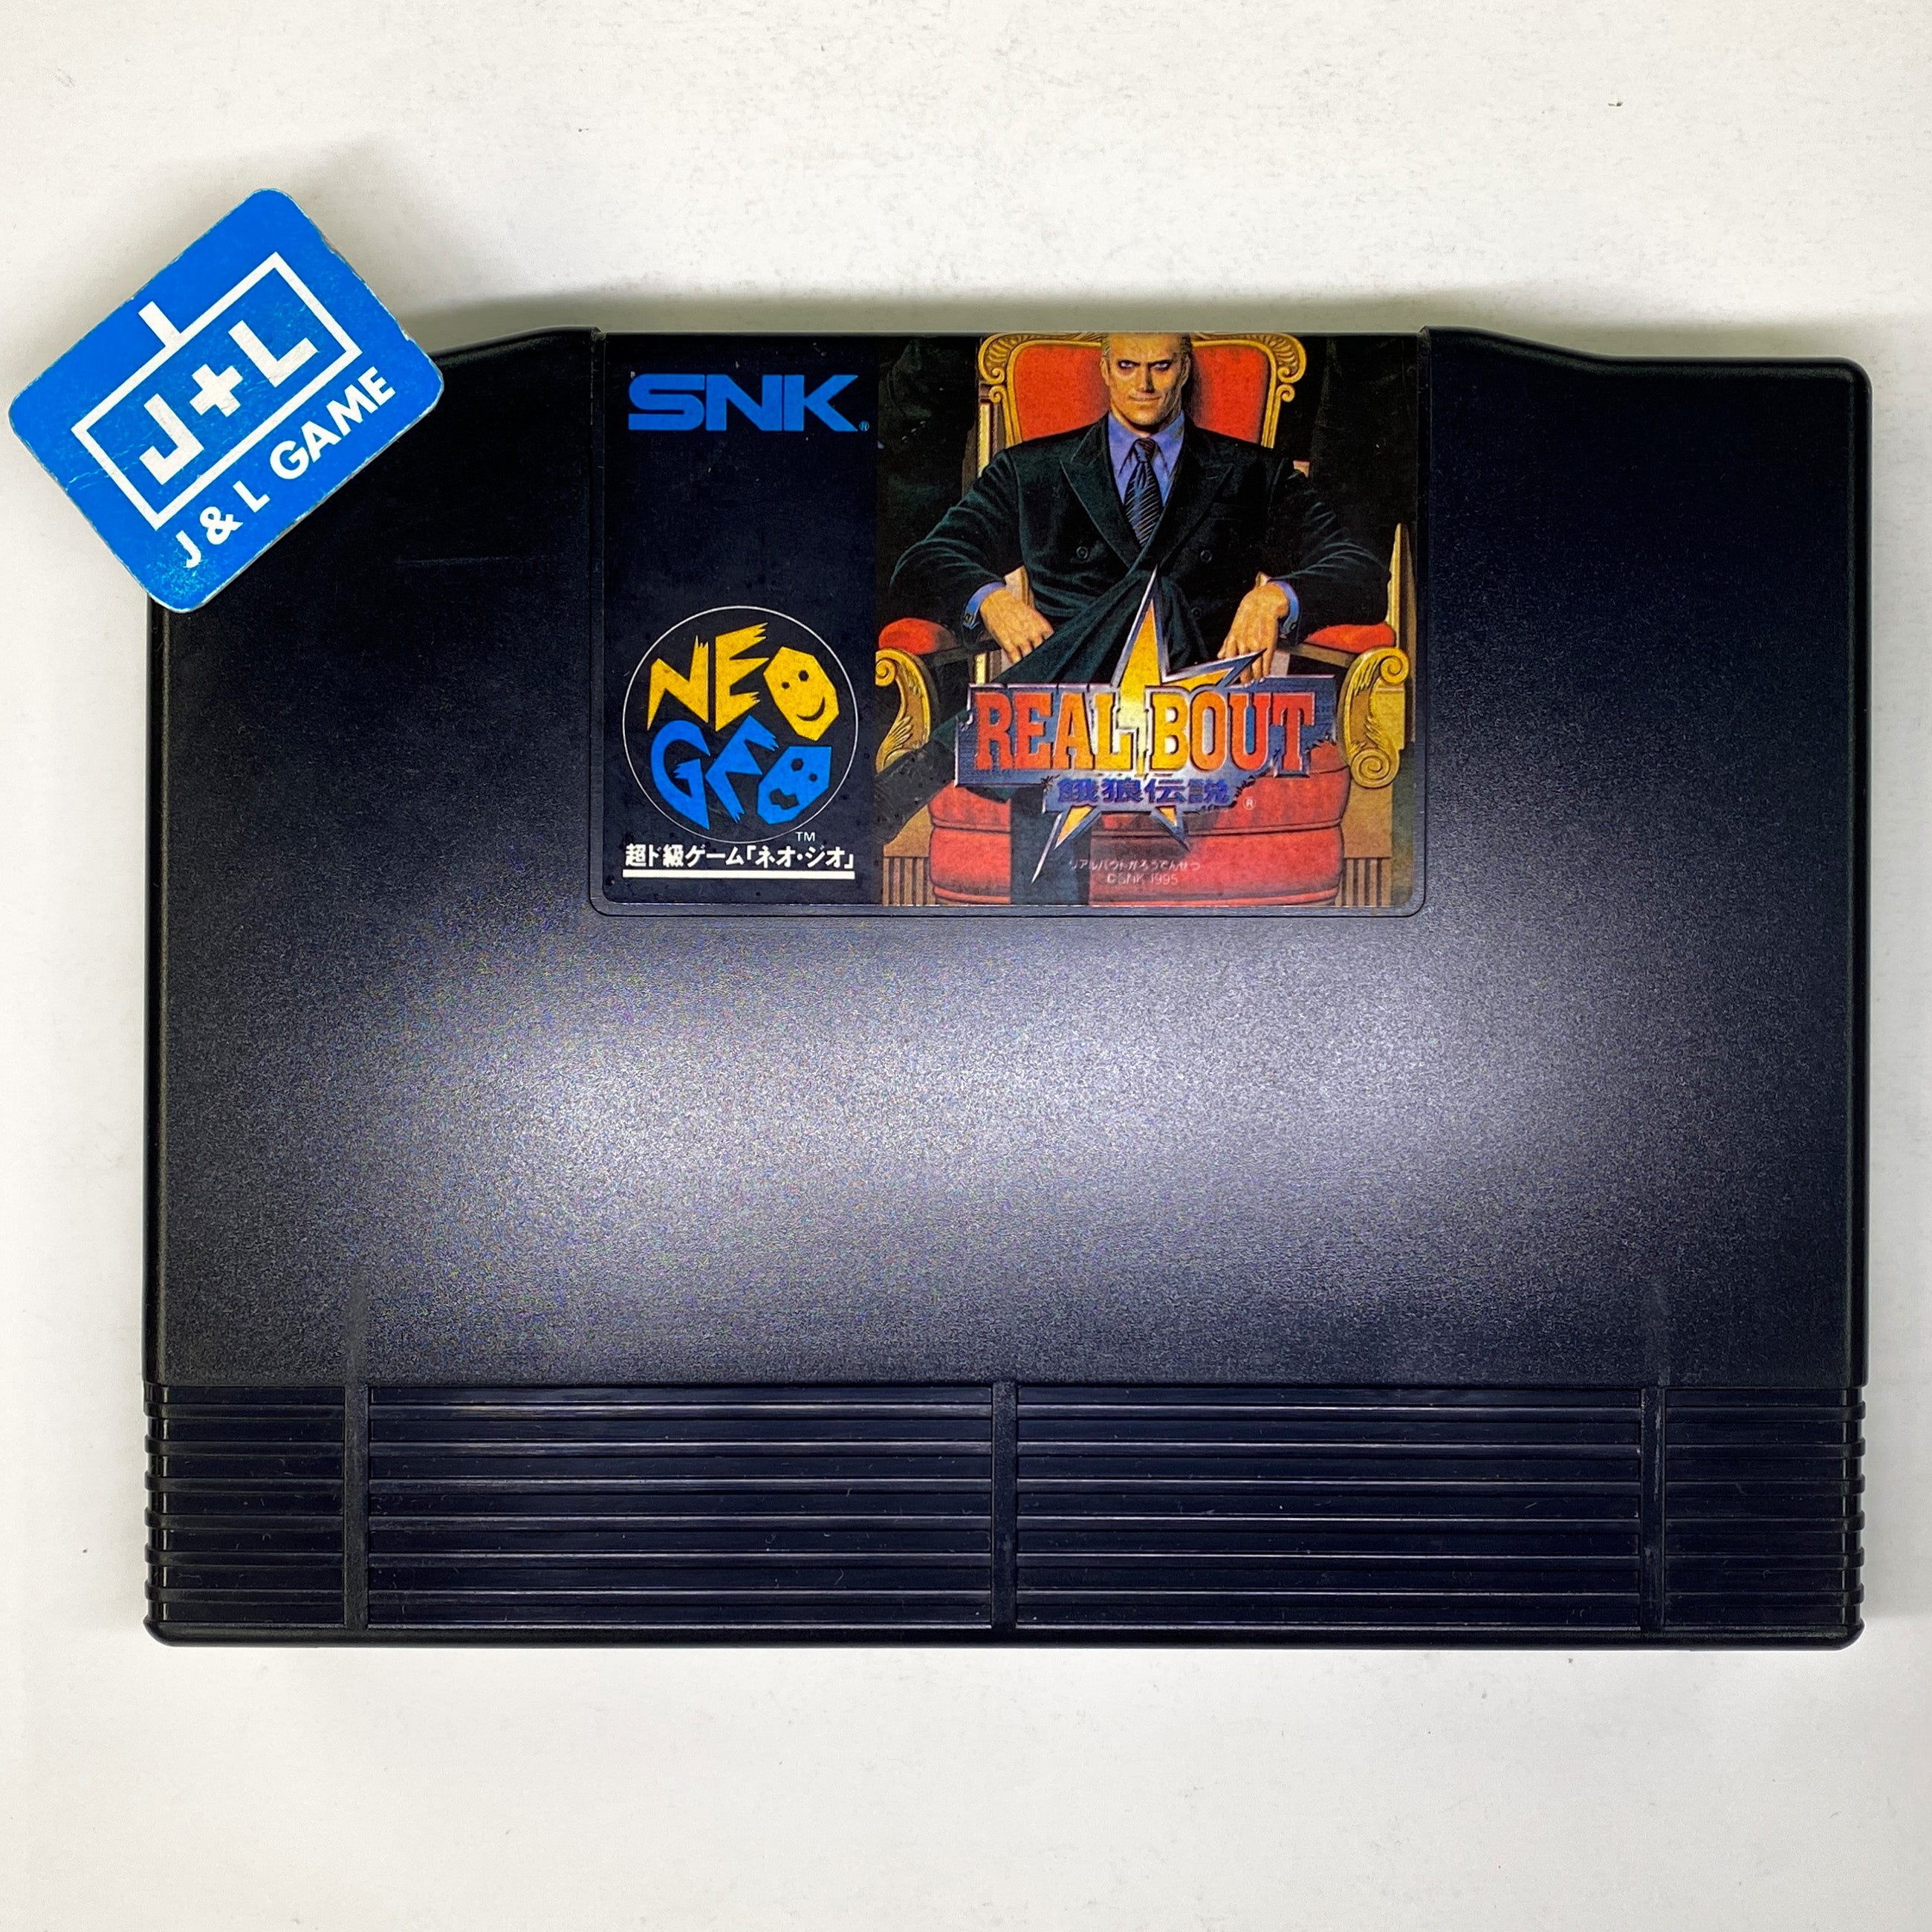 Real Bout Garou Densetsu - SNK NeoGeo (Japanese Import) [Pre-Owned] Video Games SNK   